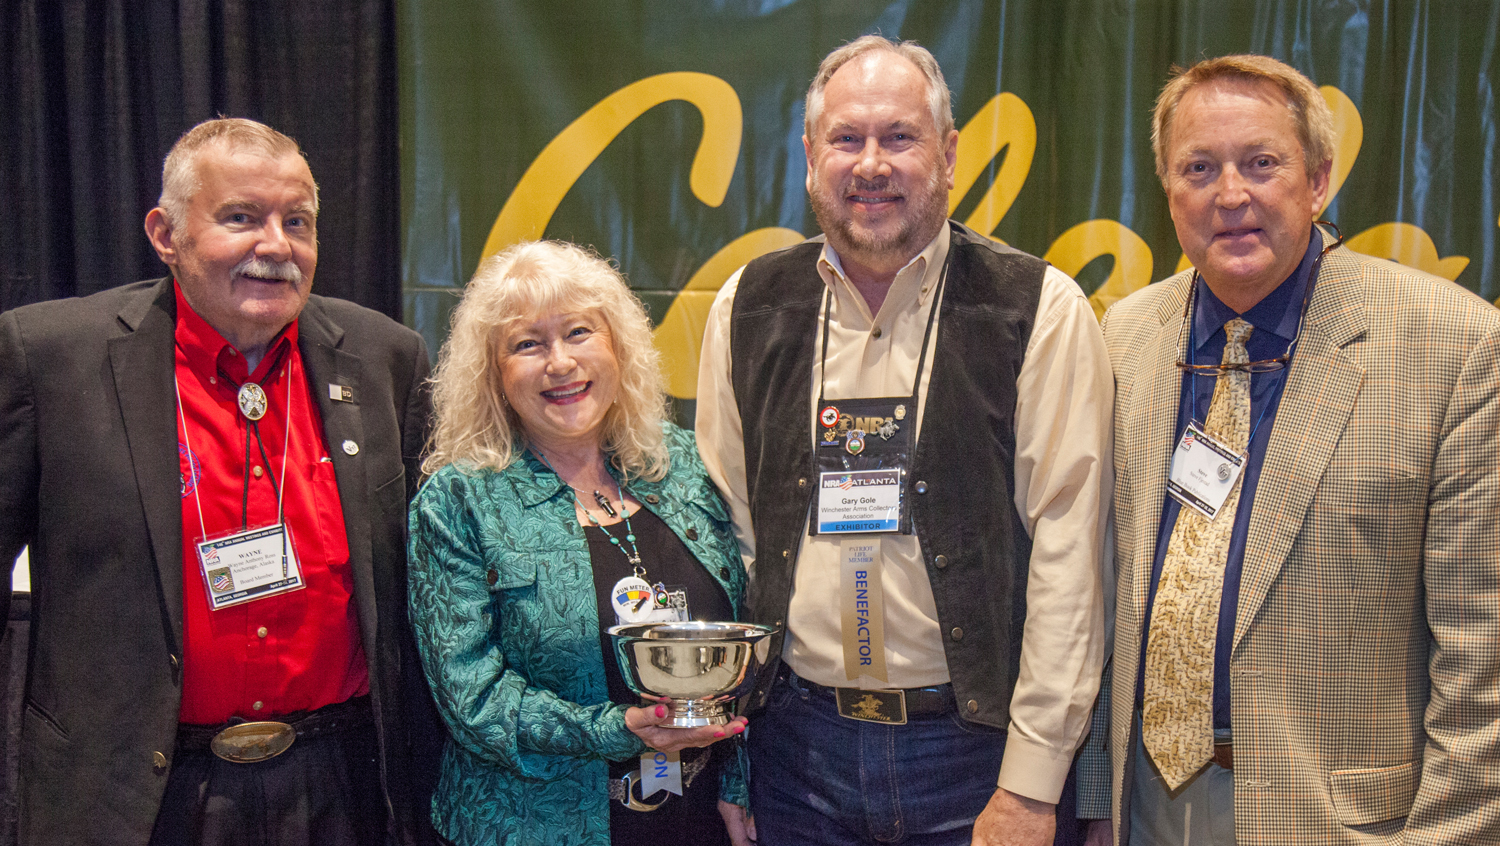 NRA Gun Collector Awards Presented At NRA Annual Meetings